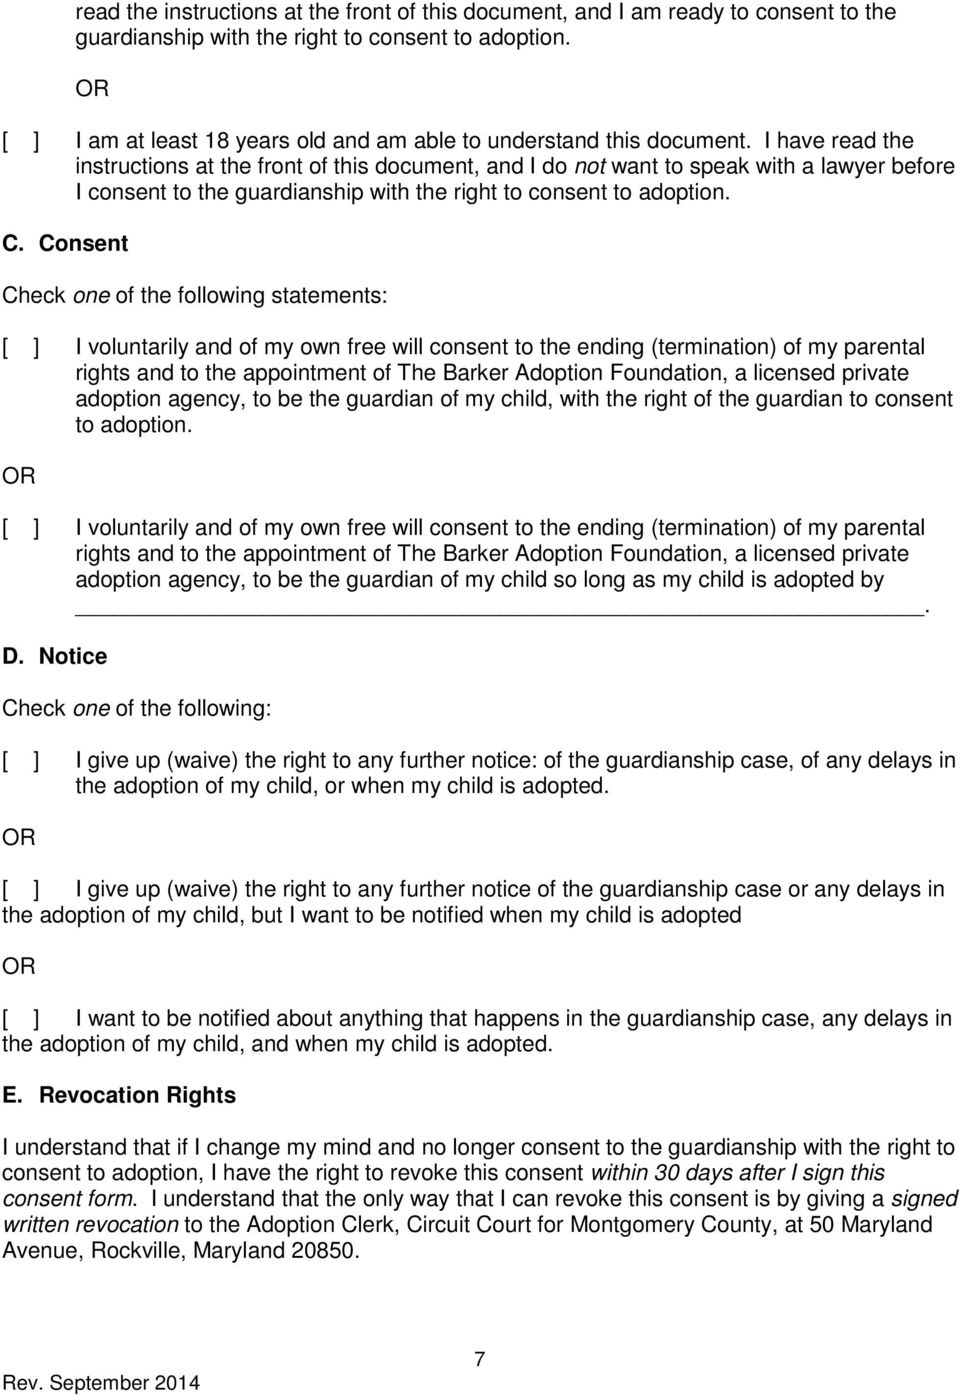 I have read the instructions at the front of this document, and I do not want to speak with a lawyer before I consent to the guardianship with the right to consent to adoption. C.